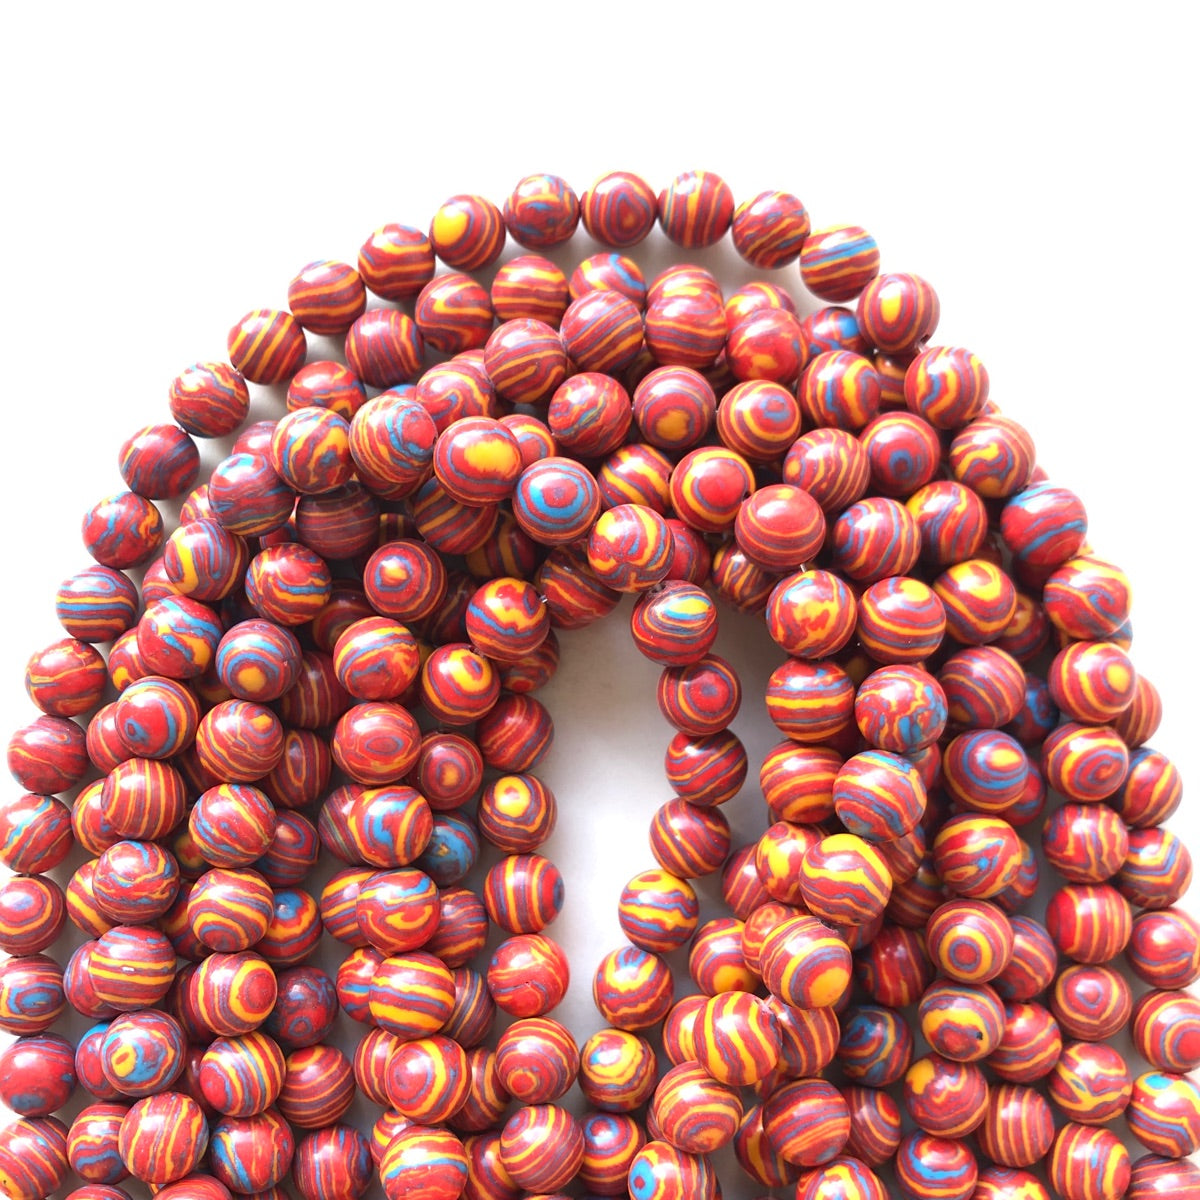 2 Strands/lot 10mm Colorful Malachite Round Beads-9 Colors Red Yellow Stone Beads New Beads Arrivals Other Stone Beads Charms Beads Beyond